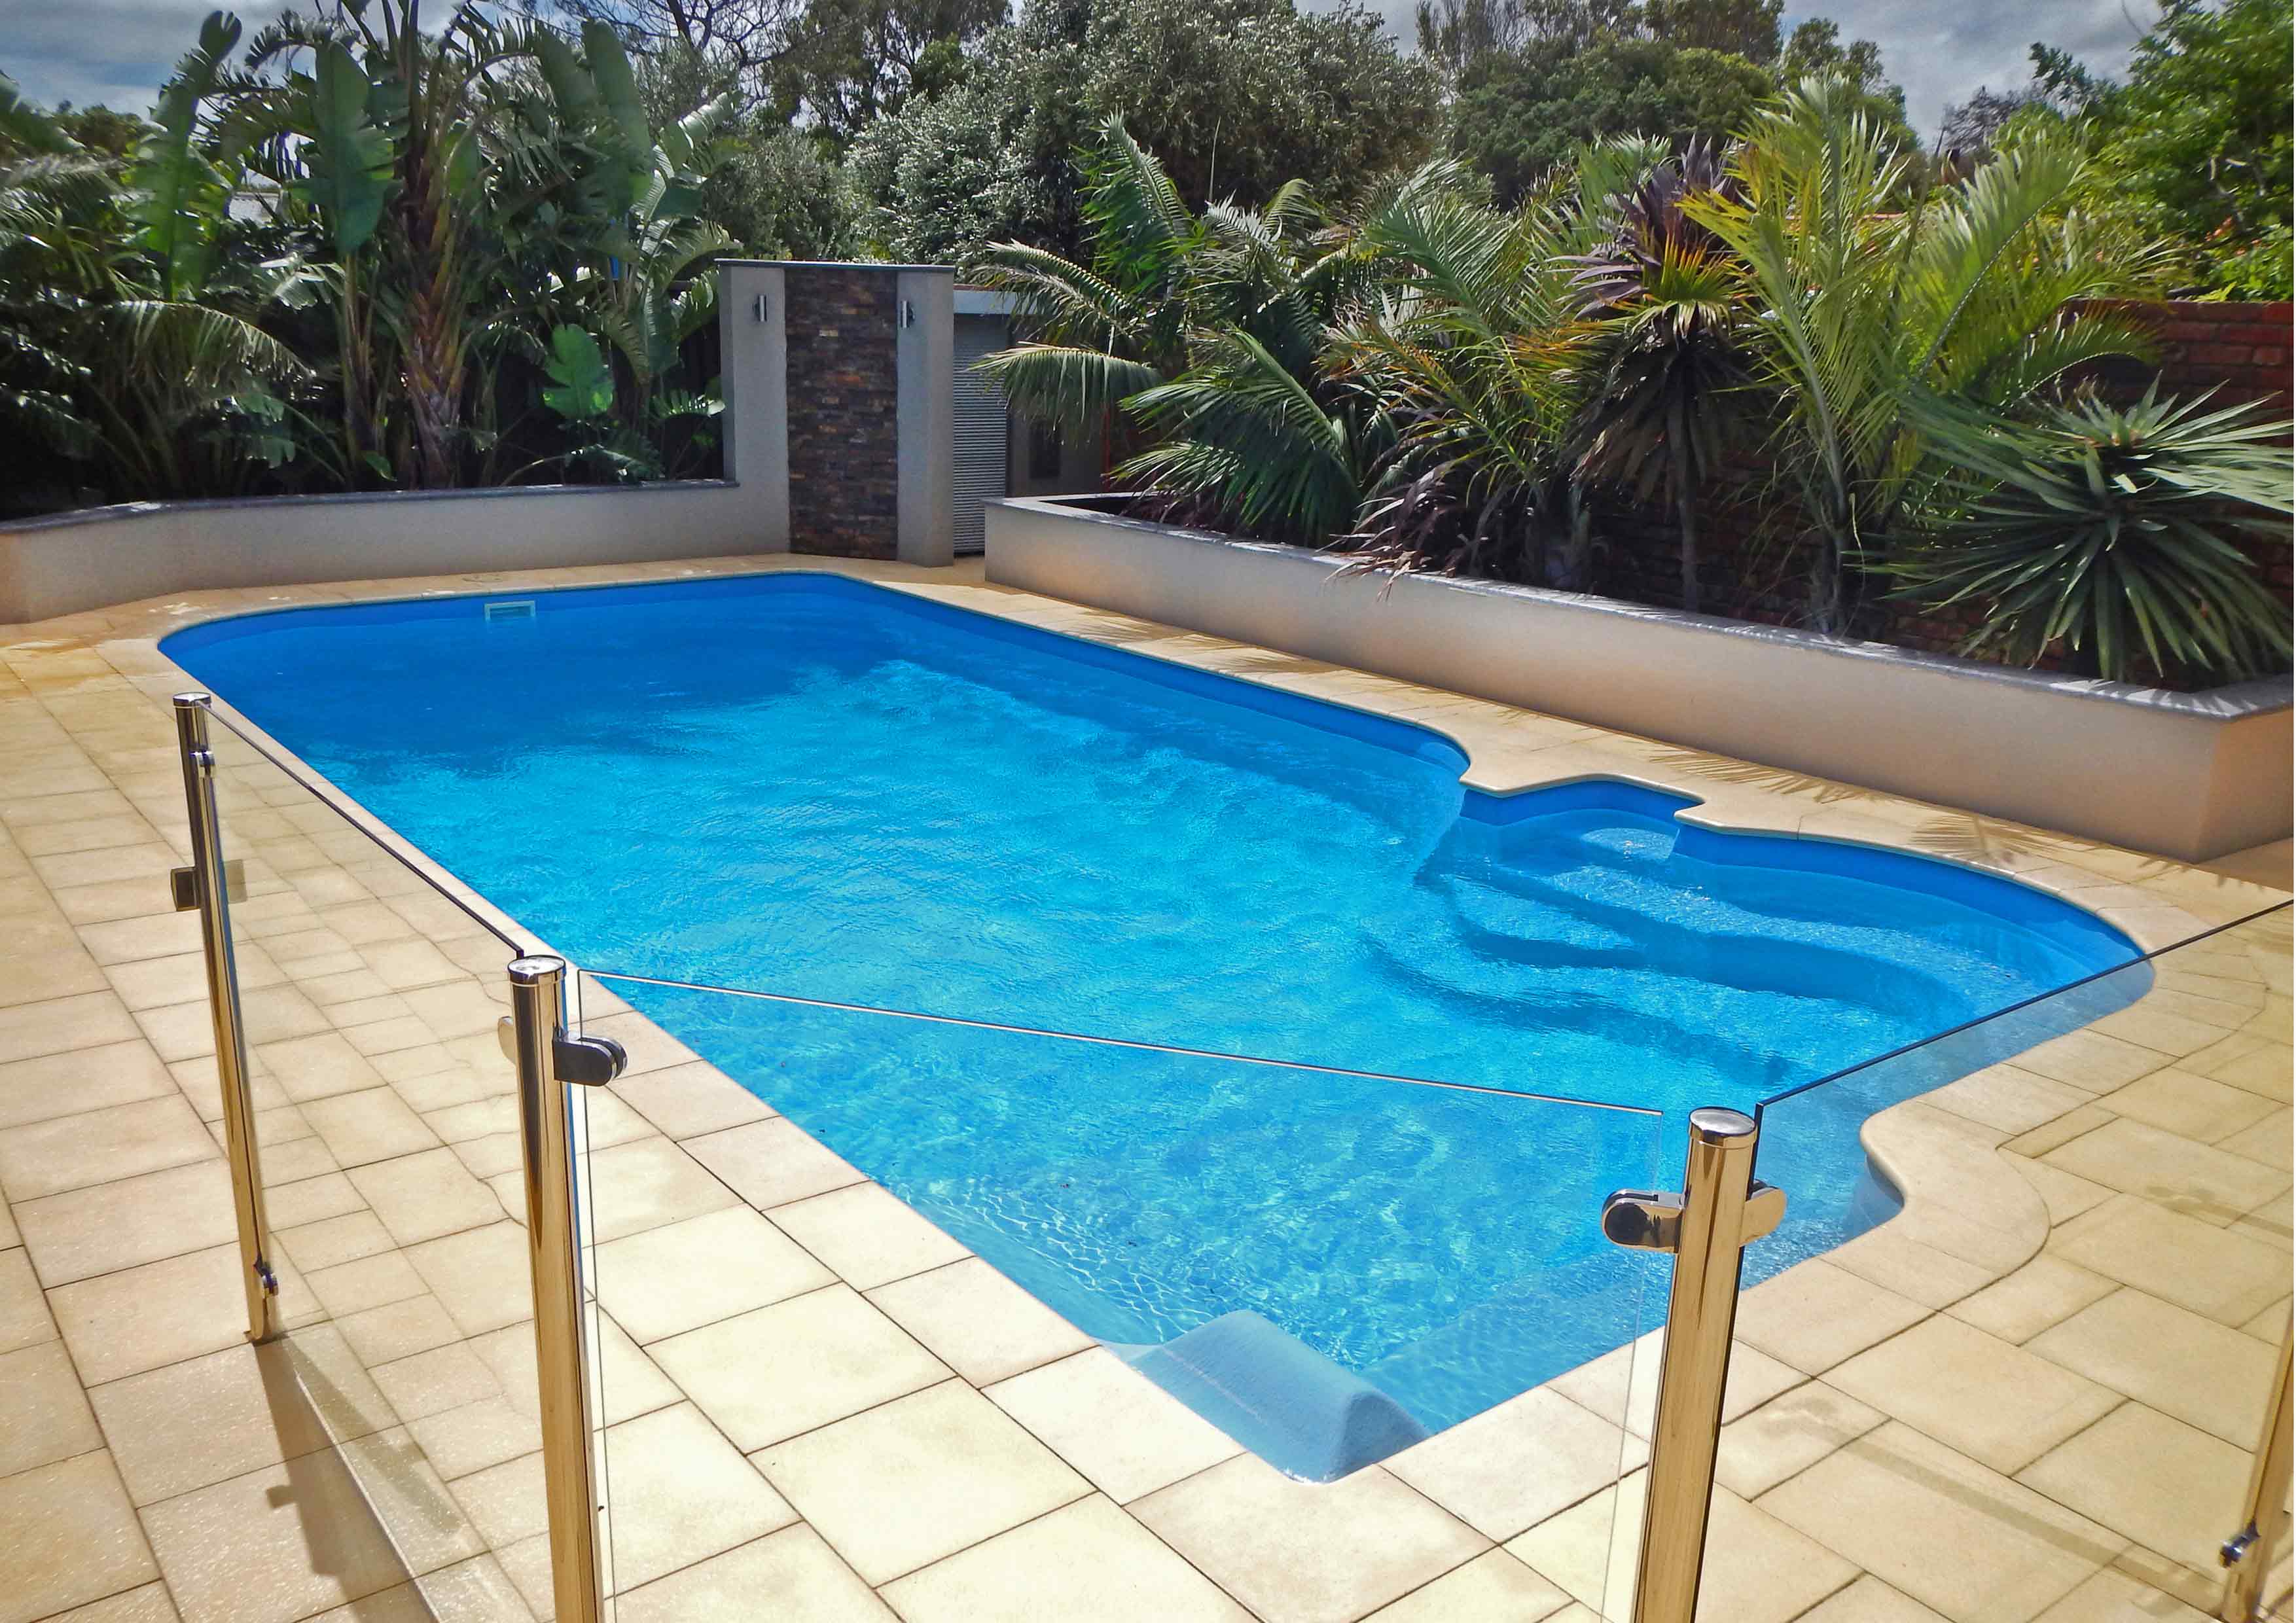 vinyl lined pools images